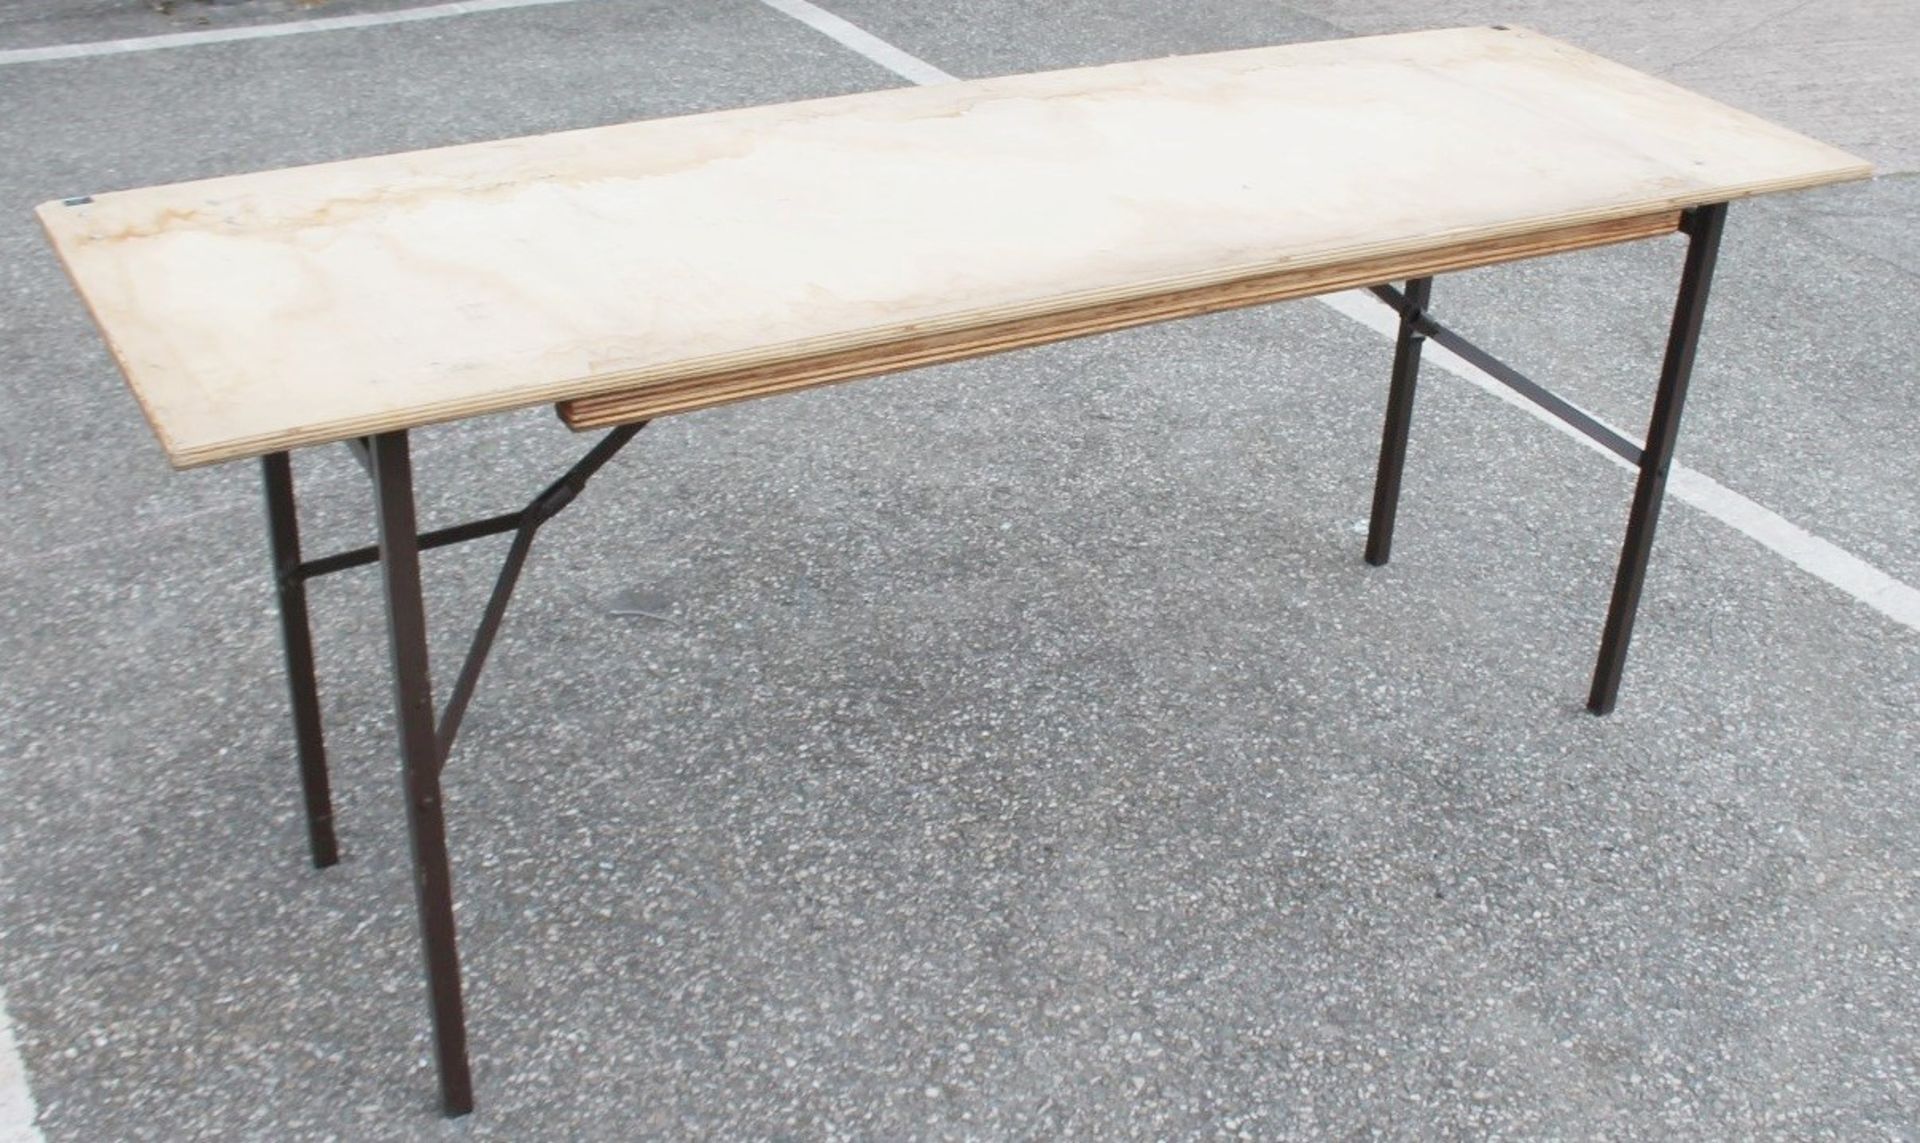 1 x Folding 6ft Wooden Topped Rectangular Trestle Table - Recently Removed From A Well-known - Image 5 of 6